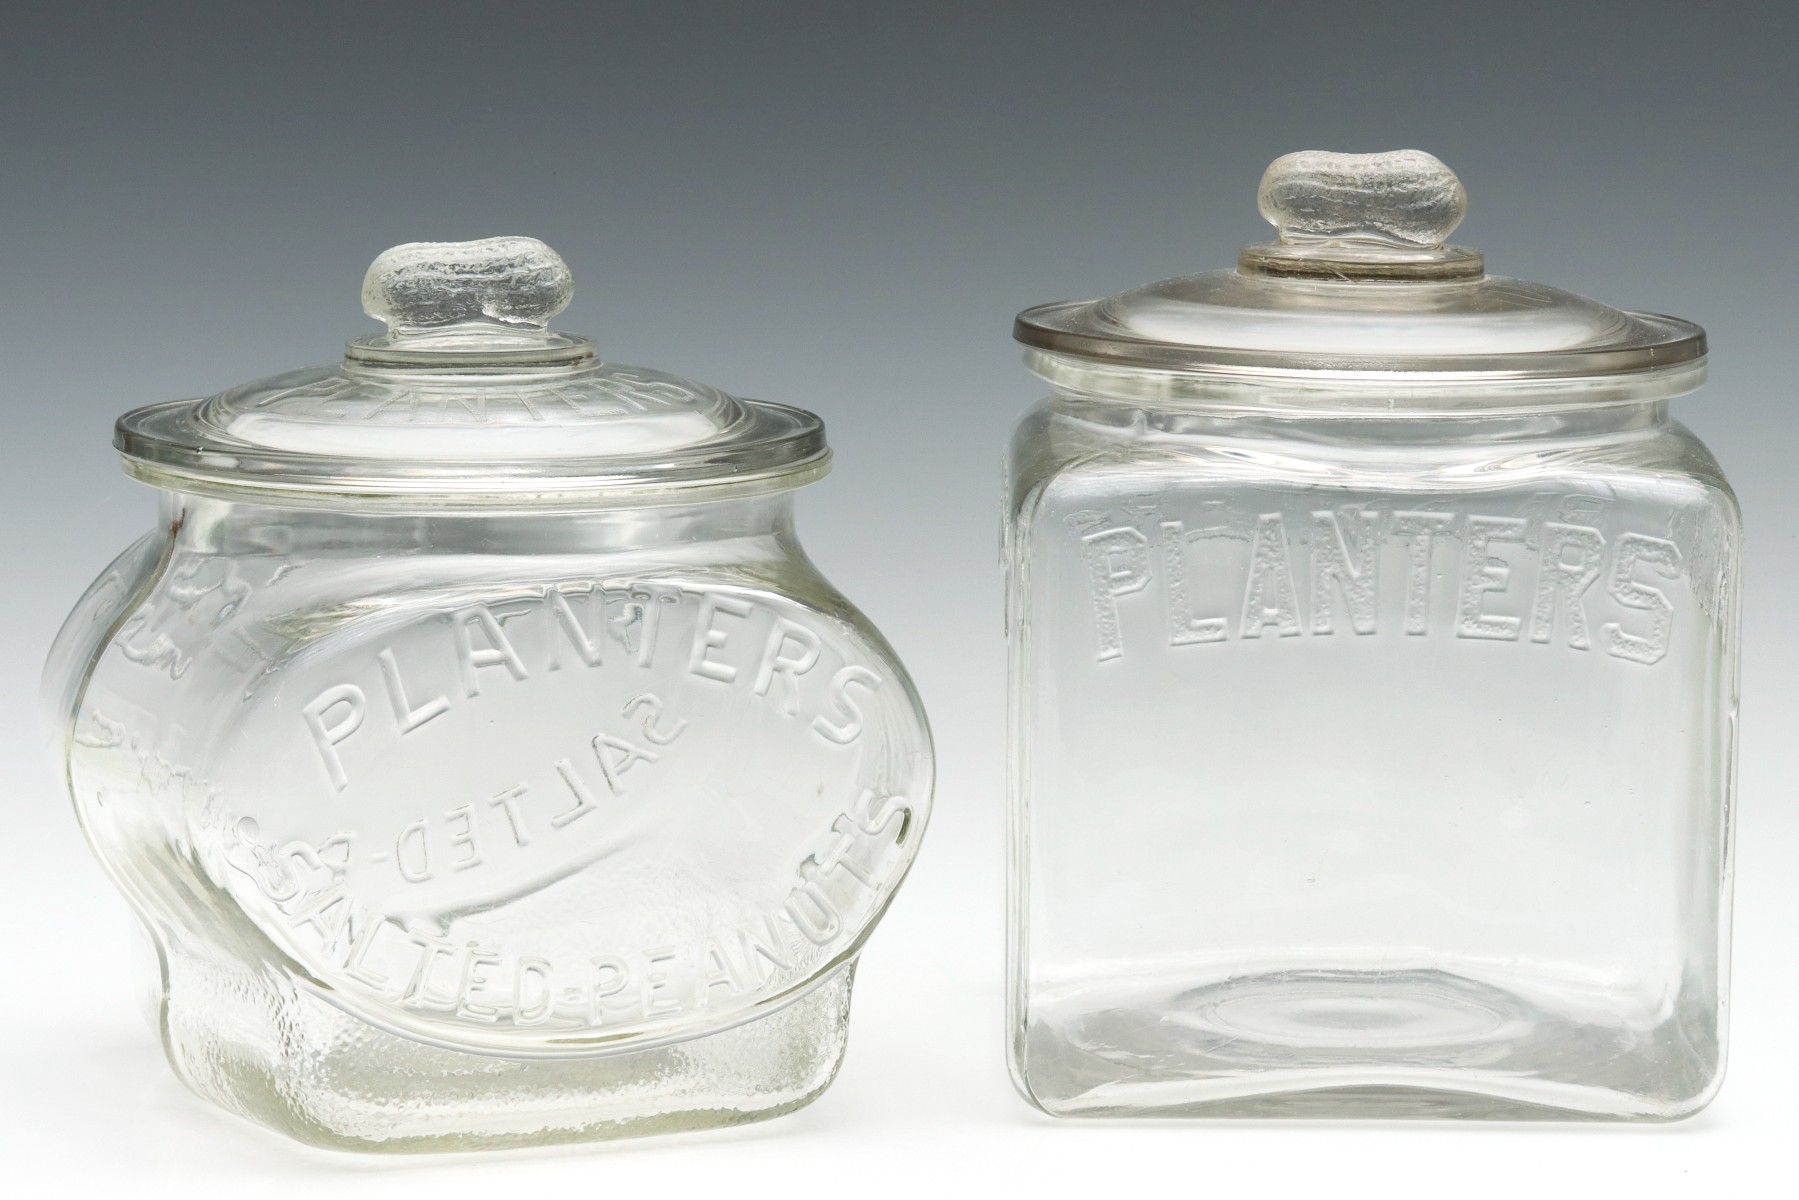 TWO DIFFERENT PLANTER'S PEANUTS ADVERTISING JARS